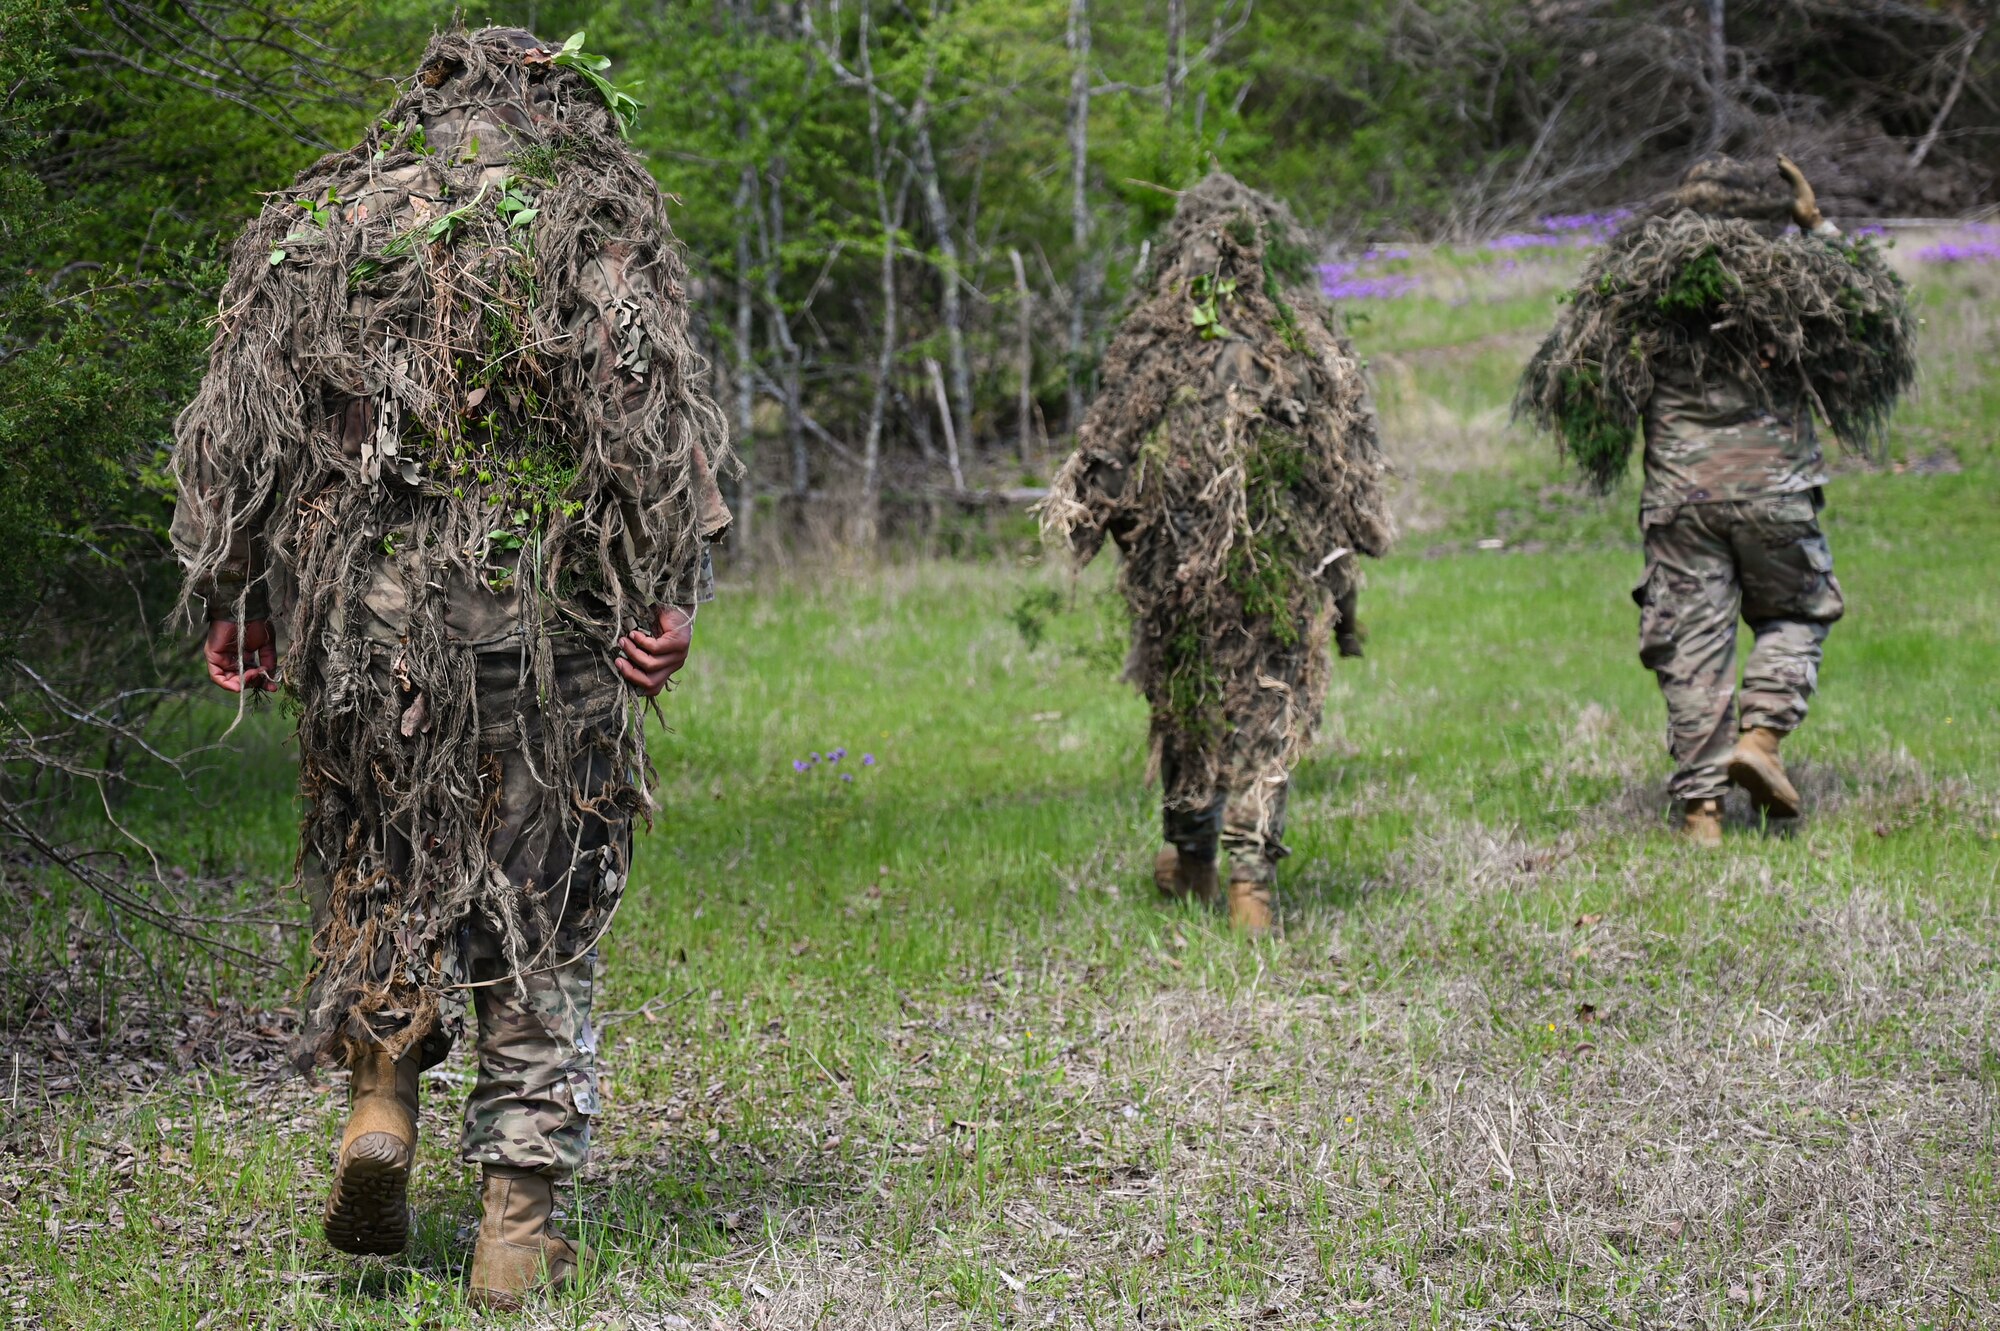 Airmen from the 19th Security Forces Squadron walk through a field during an Advanced Designated Marksman course